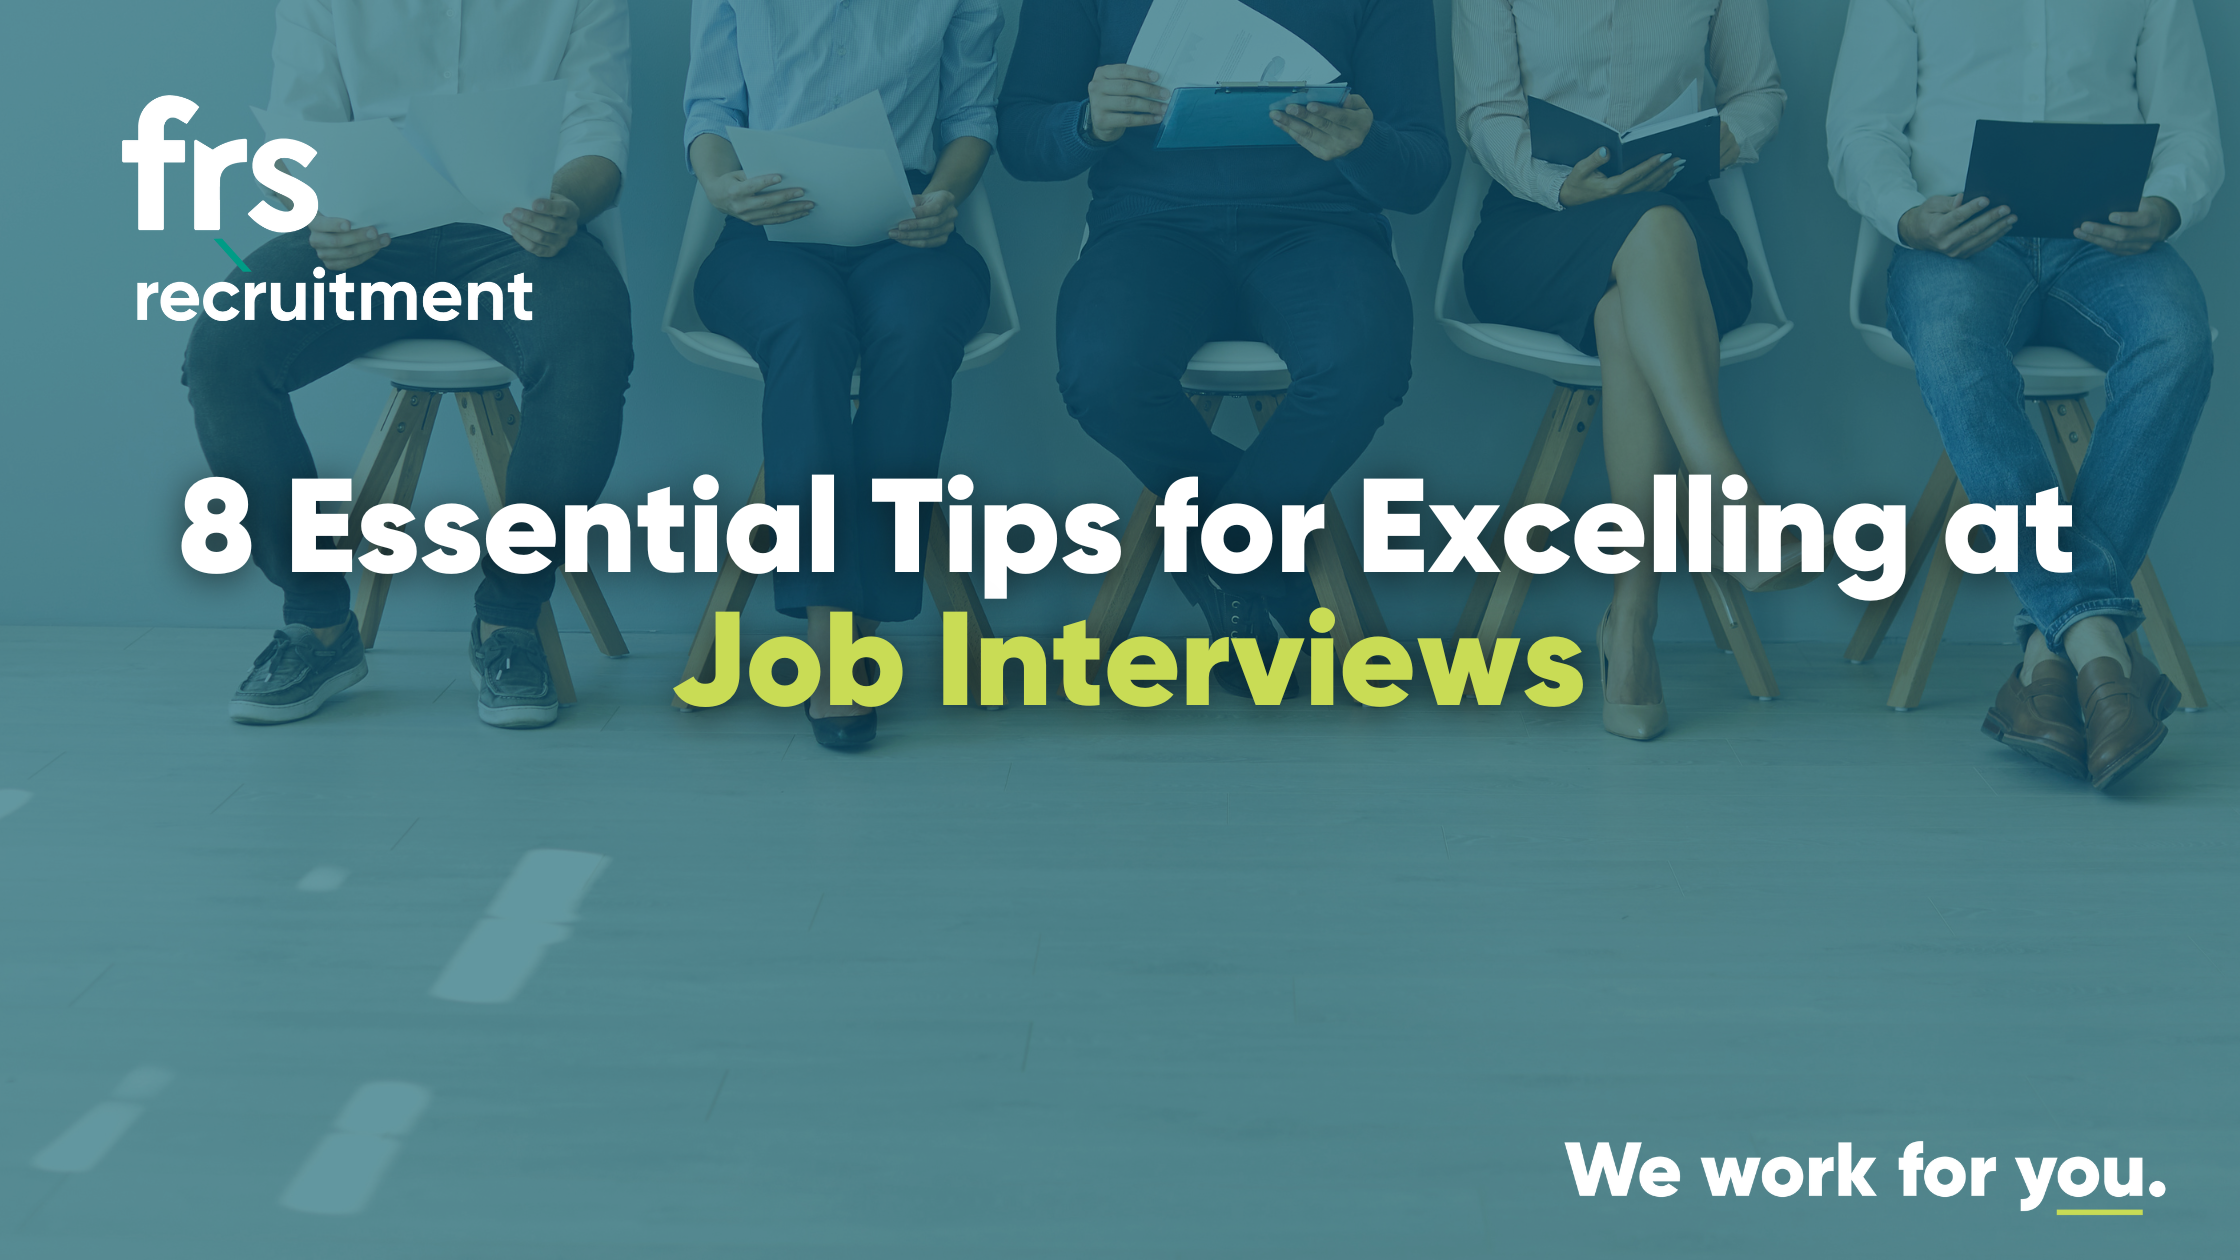 8 Essential Tips for Excelling at Job Interviews